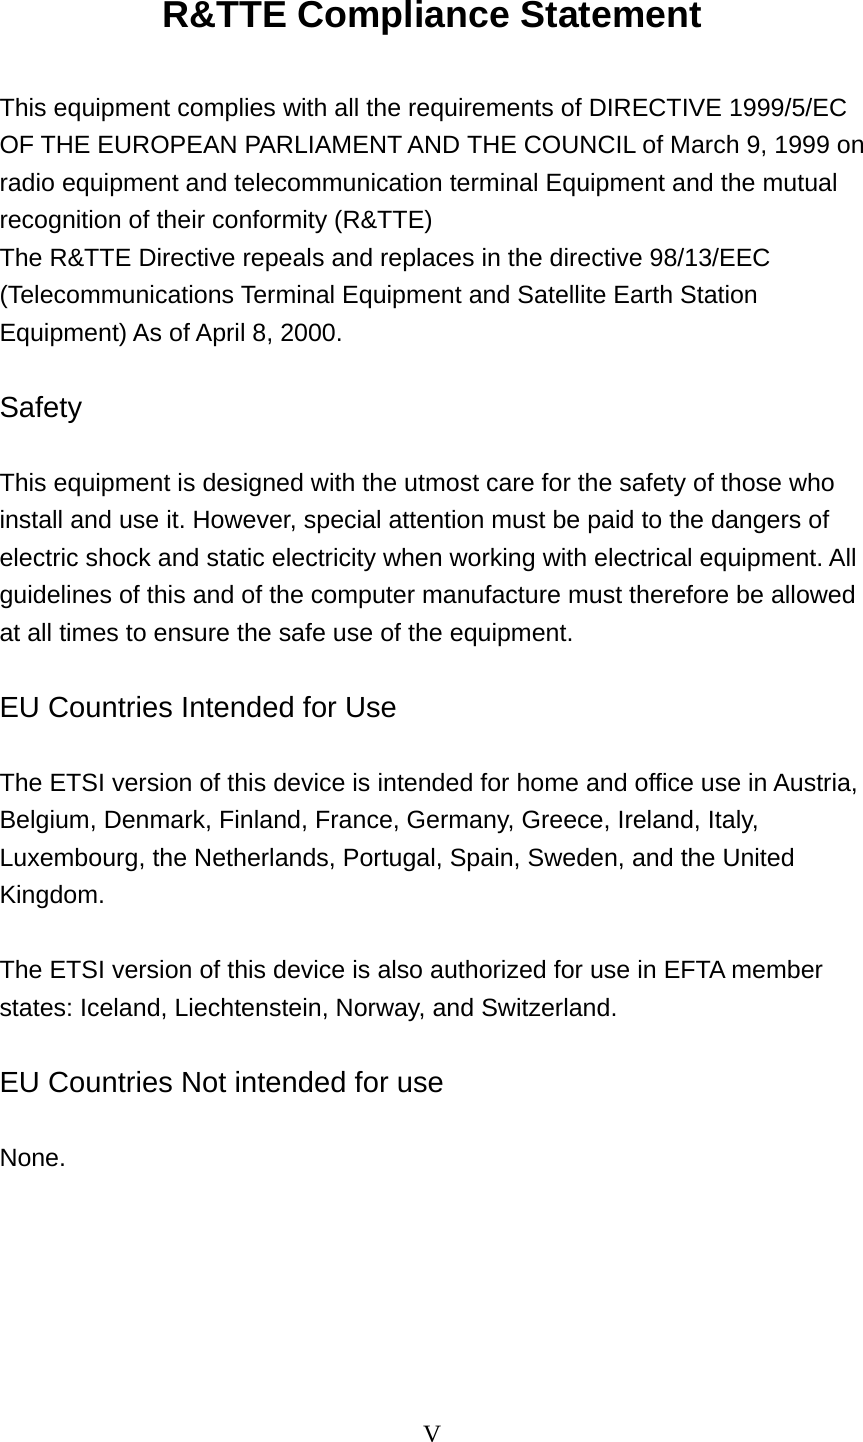 V  R&amp;TTE Compliance Statement  This equipment complies with all the requirements of DIRECTIVE 1999/5/EC OF THE EUROPEAN PARLIAMENT AND THE COUNCIL of March 9, 1999 on radio equipment and telecommunication terminal Equipment and the mutual recognition of their conformity (R&amp;TTE) The R&amp;TTE Directive repeals and replaces in the directive 98/13/EEC (Telecommunications Terminal Equipment and Satellite Earth Station Equipment) As of April 8, 2000.  Safety  This equipment is designed with the utmost care for the safety of those who install and use it. However, special attention must be paid to the dangers of electric shock and static electricity when working with electrical equipment. All guidelines of this and of the computer manufacture must therefore be allowed at all times to ensure the safe use of the equipment.  EU Countries Intended for Use    The ETSI version of this device is intended for home and office use in Austria, Belgium, Denmark, Finland, France, Germany, Greece, Ireland, Italy, Luxembourg, the Netherlands, Portugal, Spain, Sweden, and the United Kingdom.  The ETSI version of this device is also authorized for use in EFTA member states: Iceland, Liechtenstein, Norway, and Switzerland.  EU Countries Not intended for use    None.  